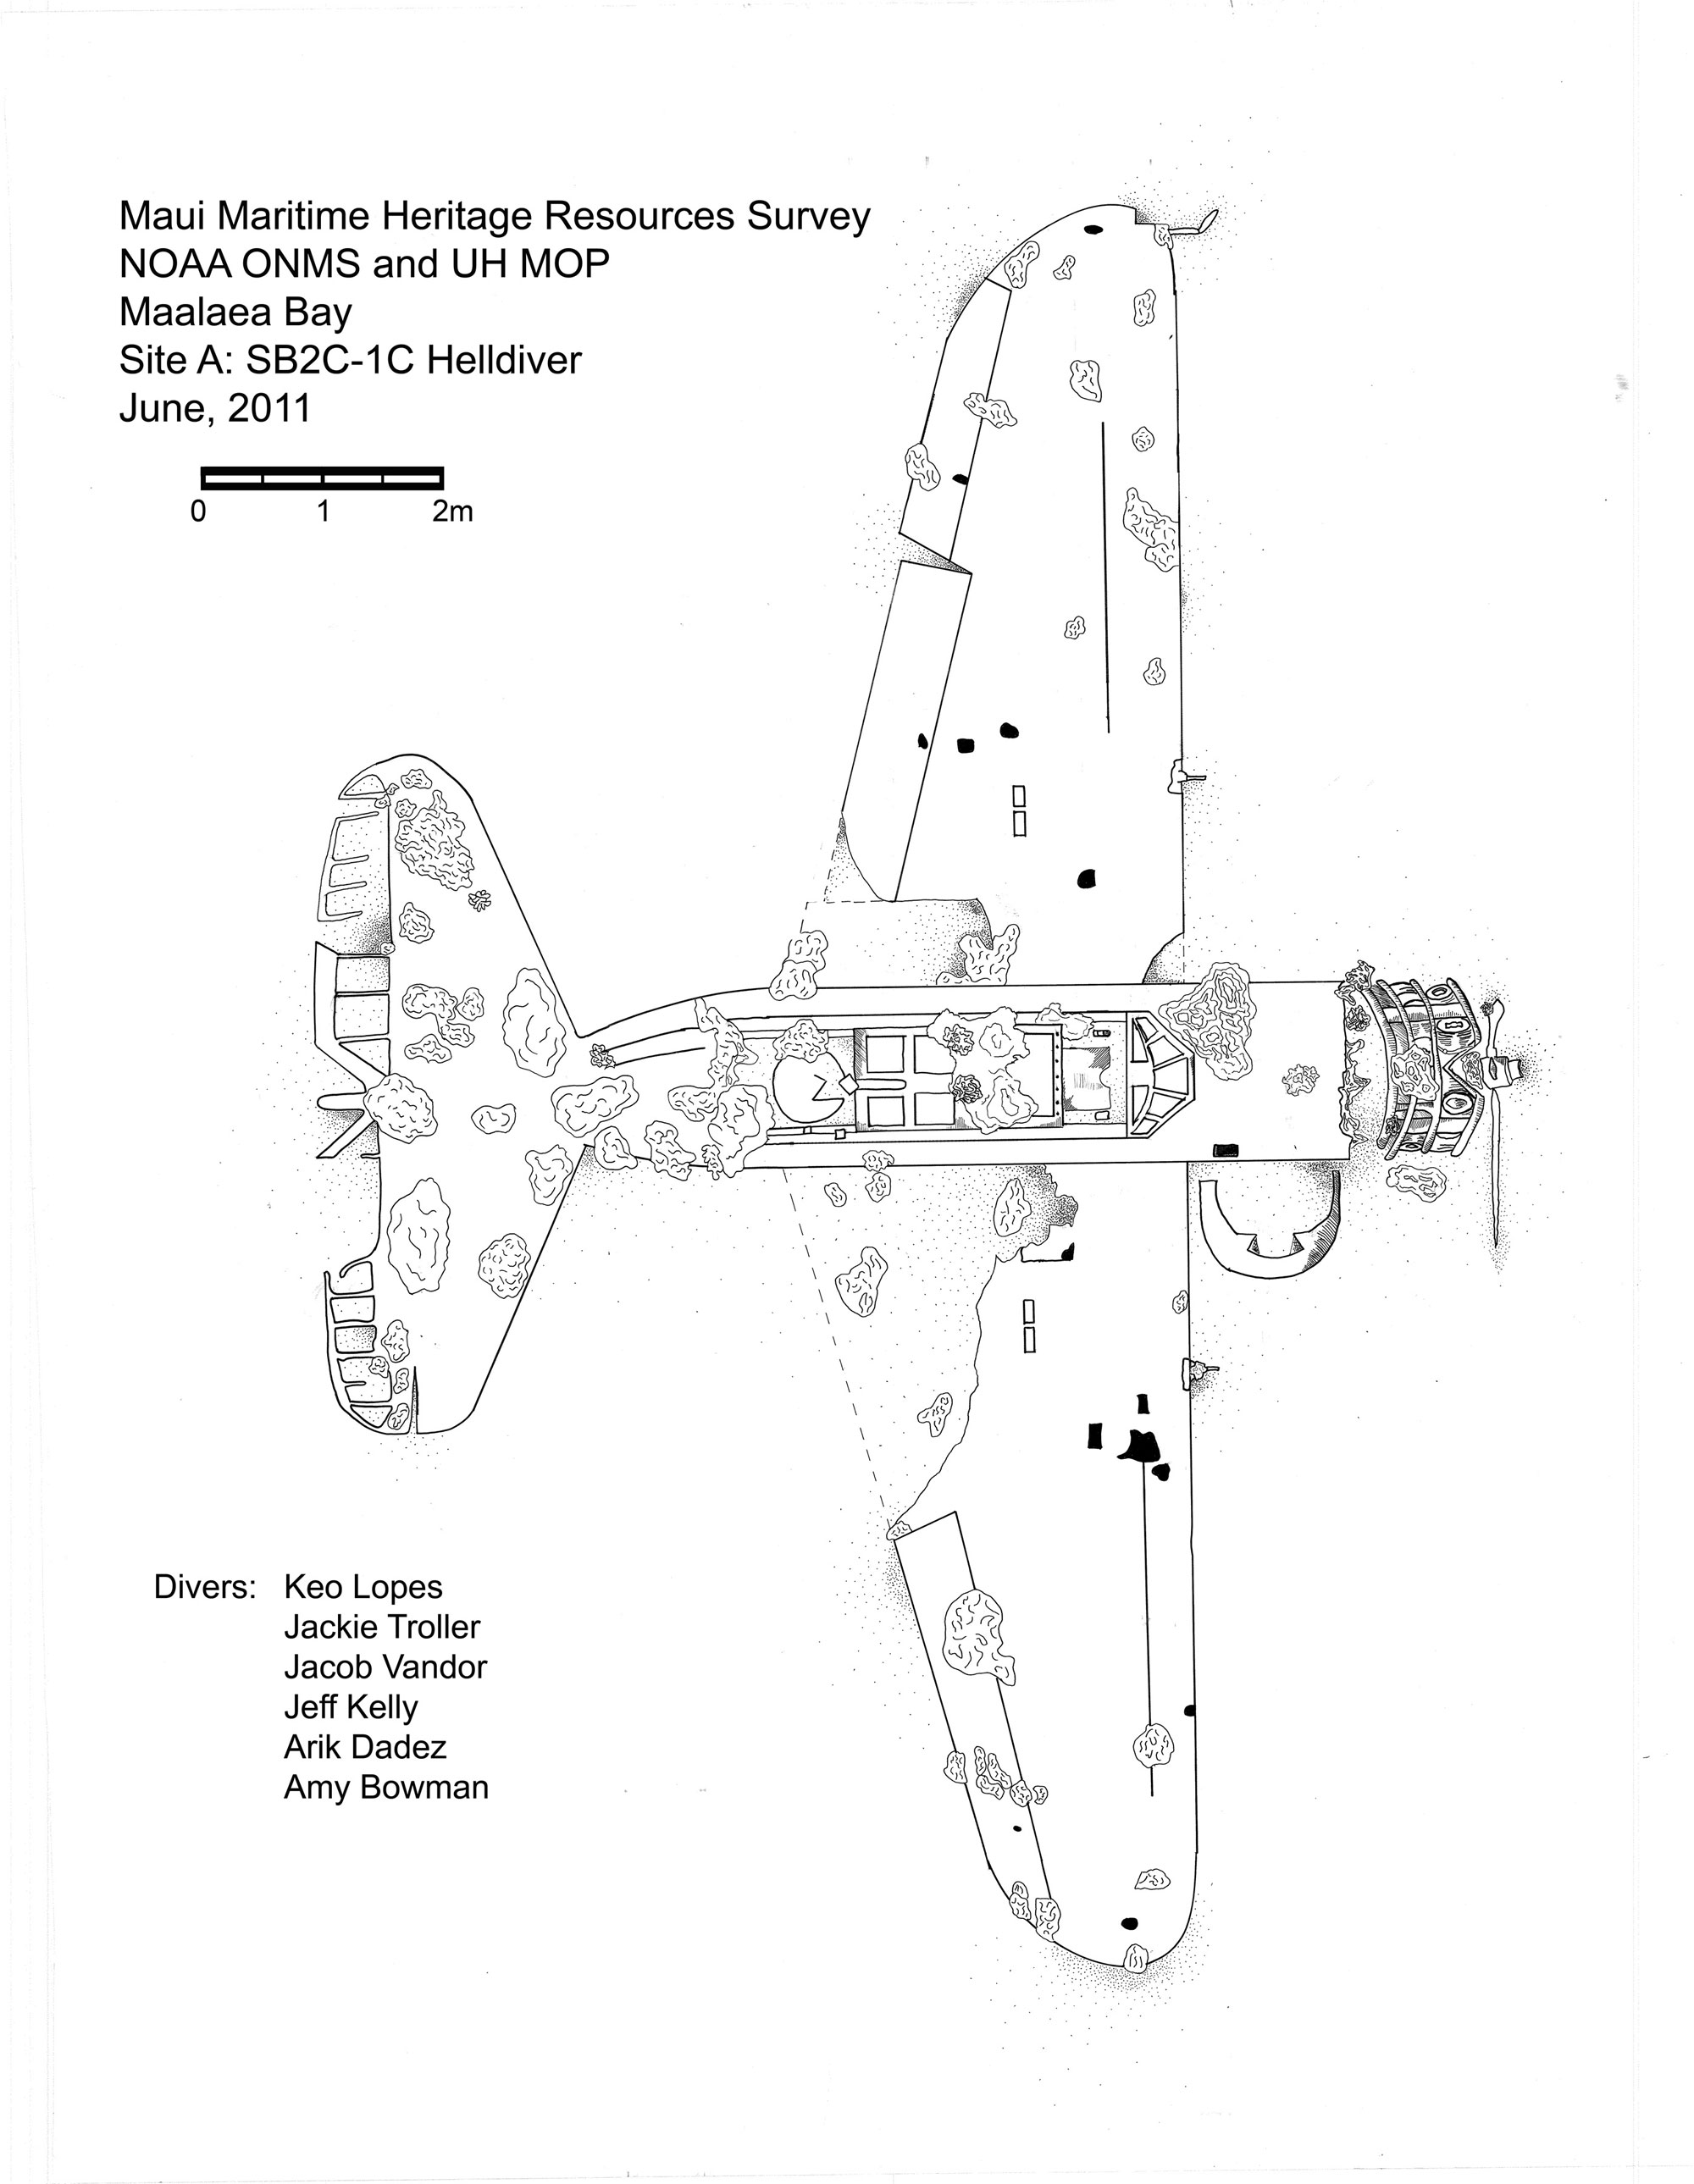 Plan view drawing of the Helldiver site completed by the students.